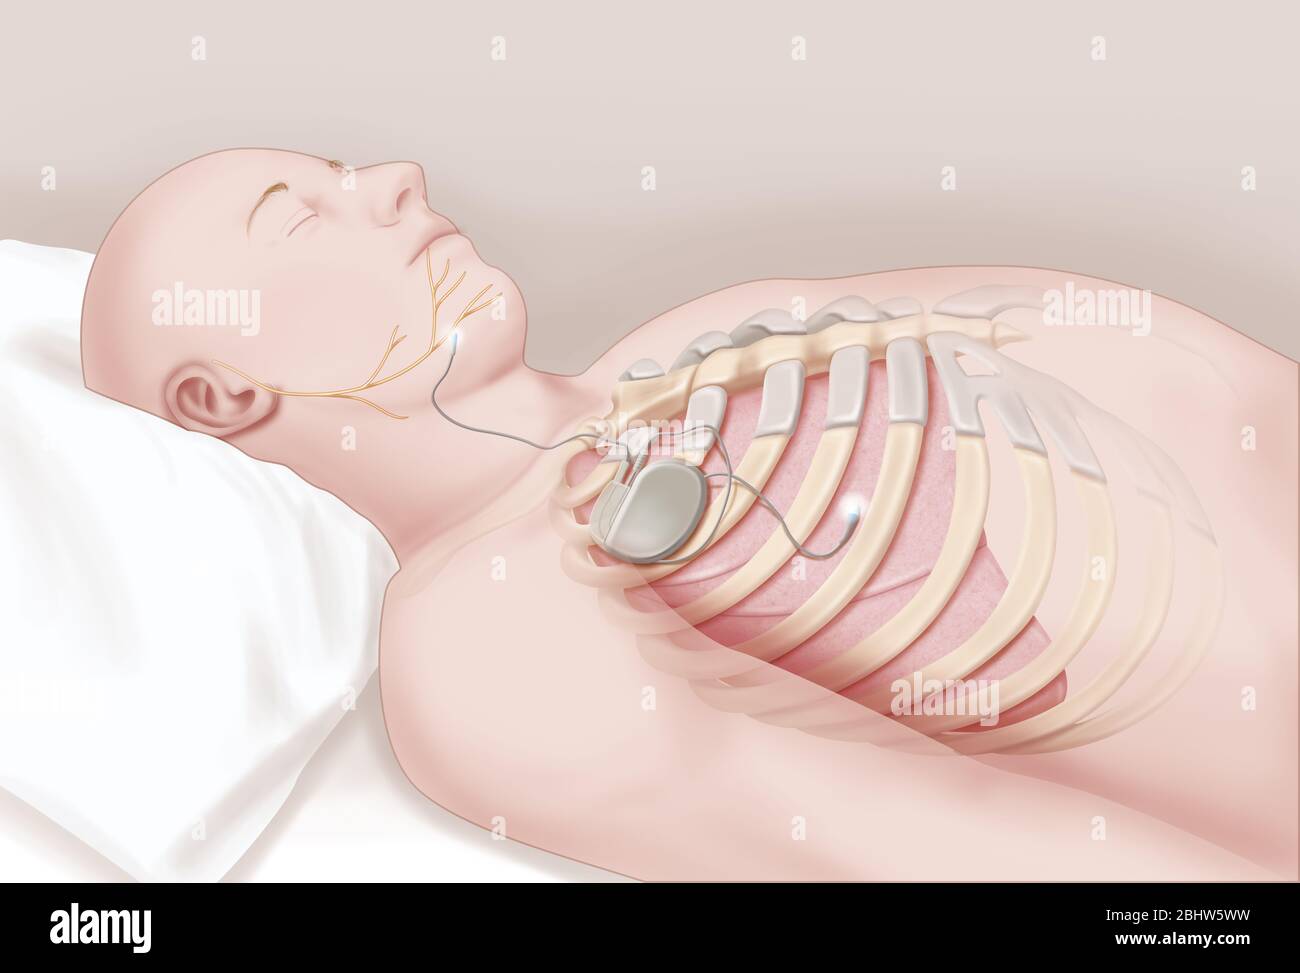 Sleep apnea treatment. A pacemaker is implanted under the collarbone connected to two electrodes, one to the hypoglossal nerve at the level of the ton Stock Photo